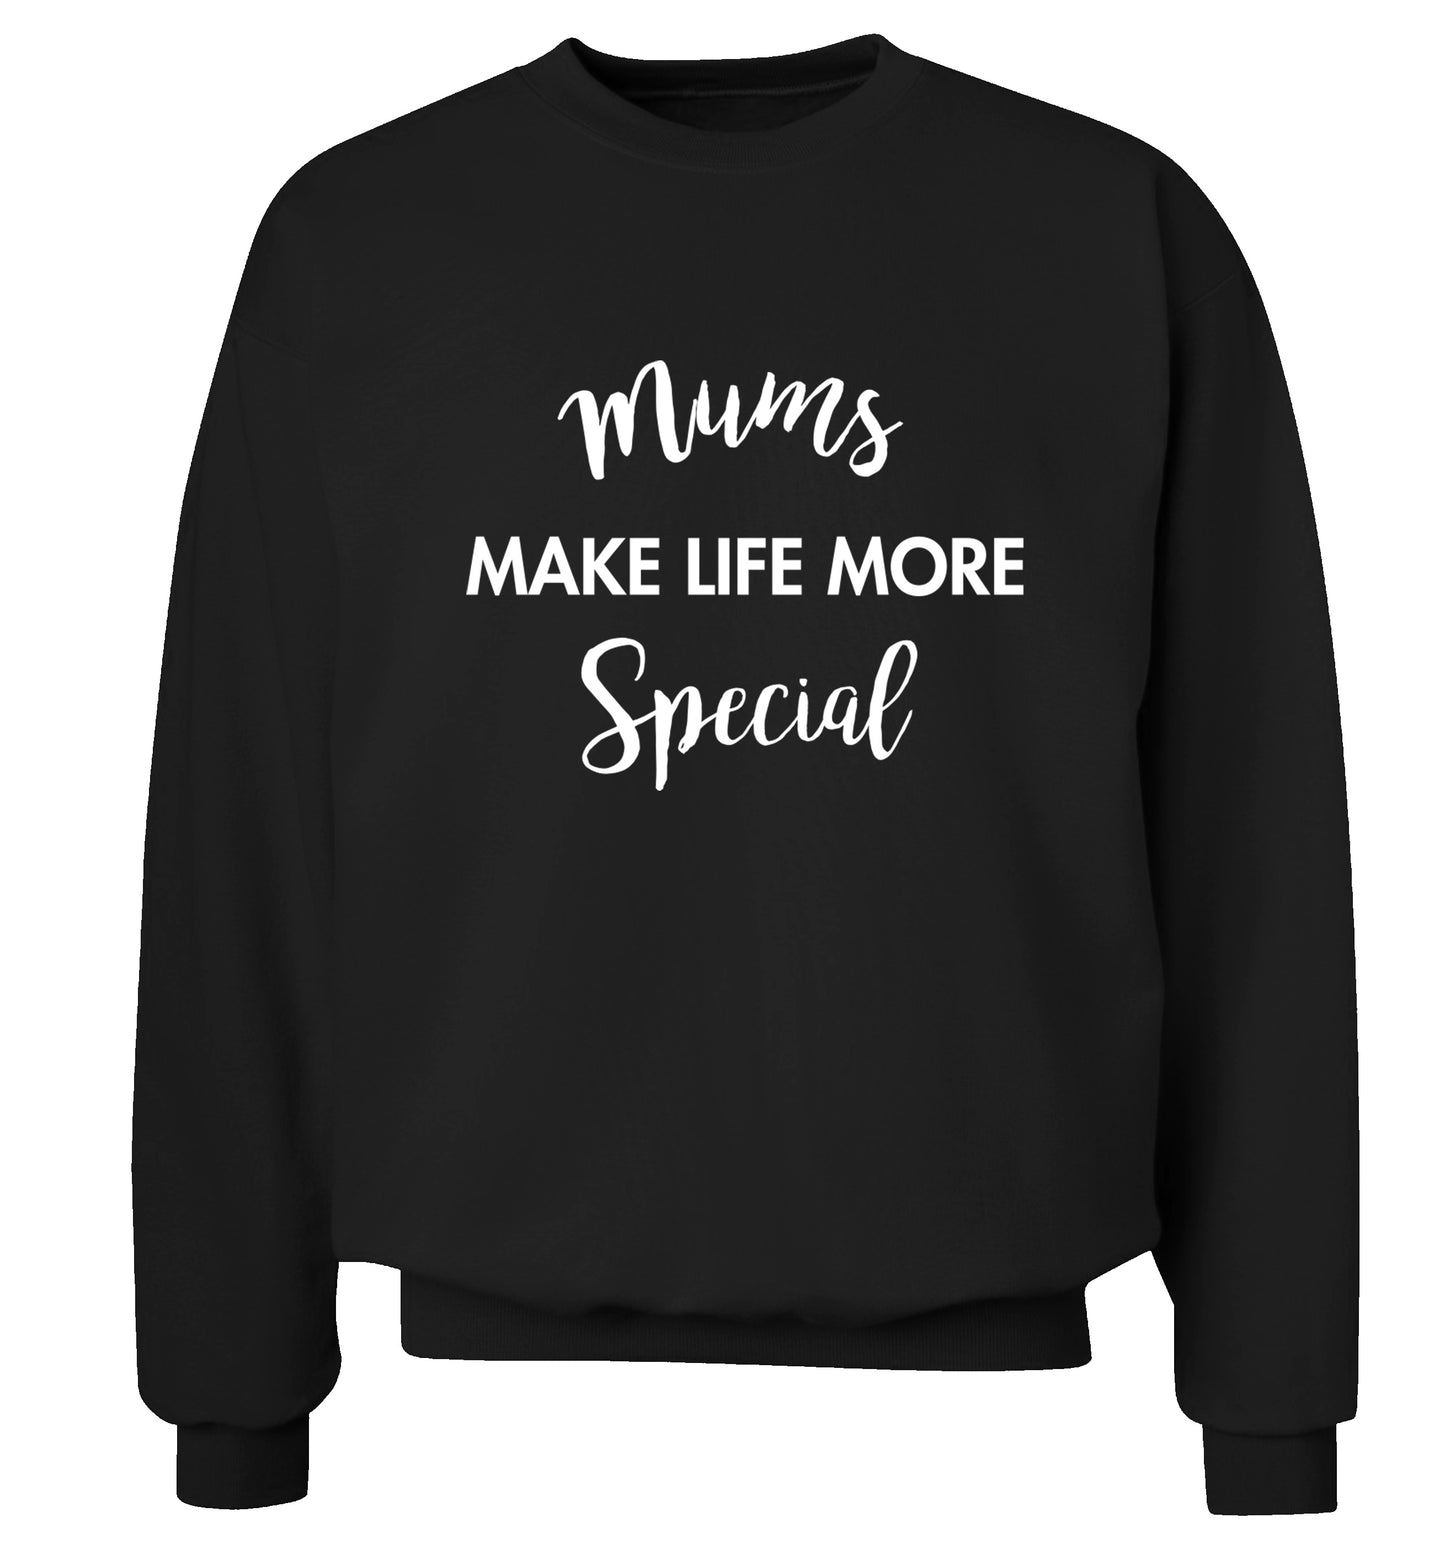 Mum's make life more special adult's unisex black sweater 2XL